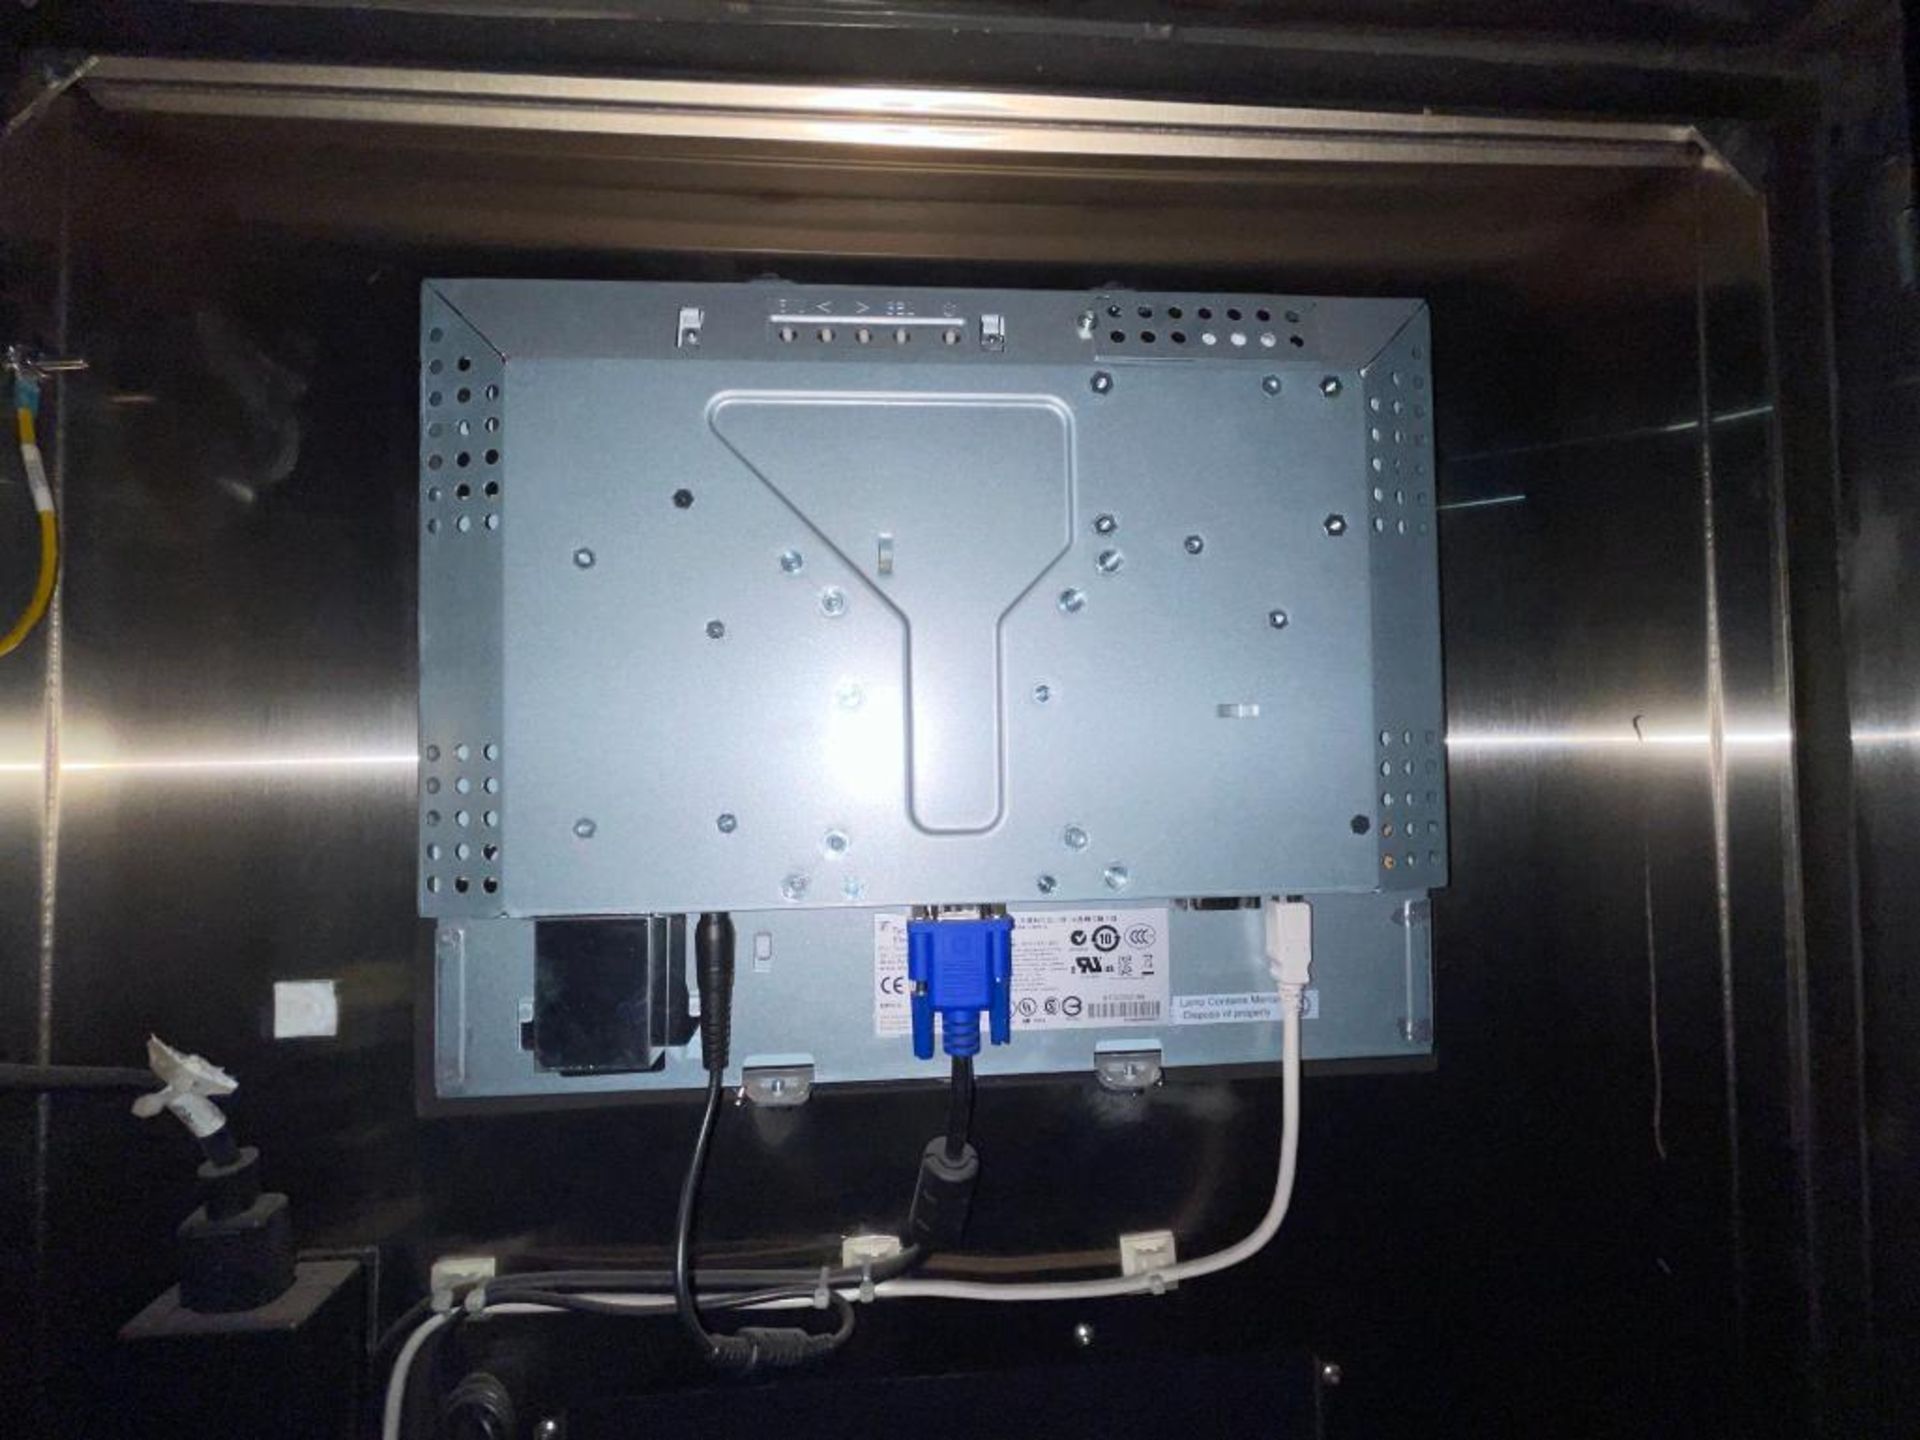 stainless steel pedestal control panel - Image 17 of 20